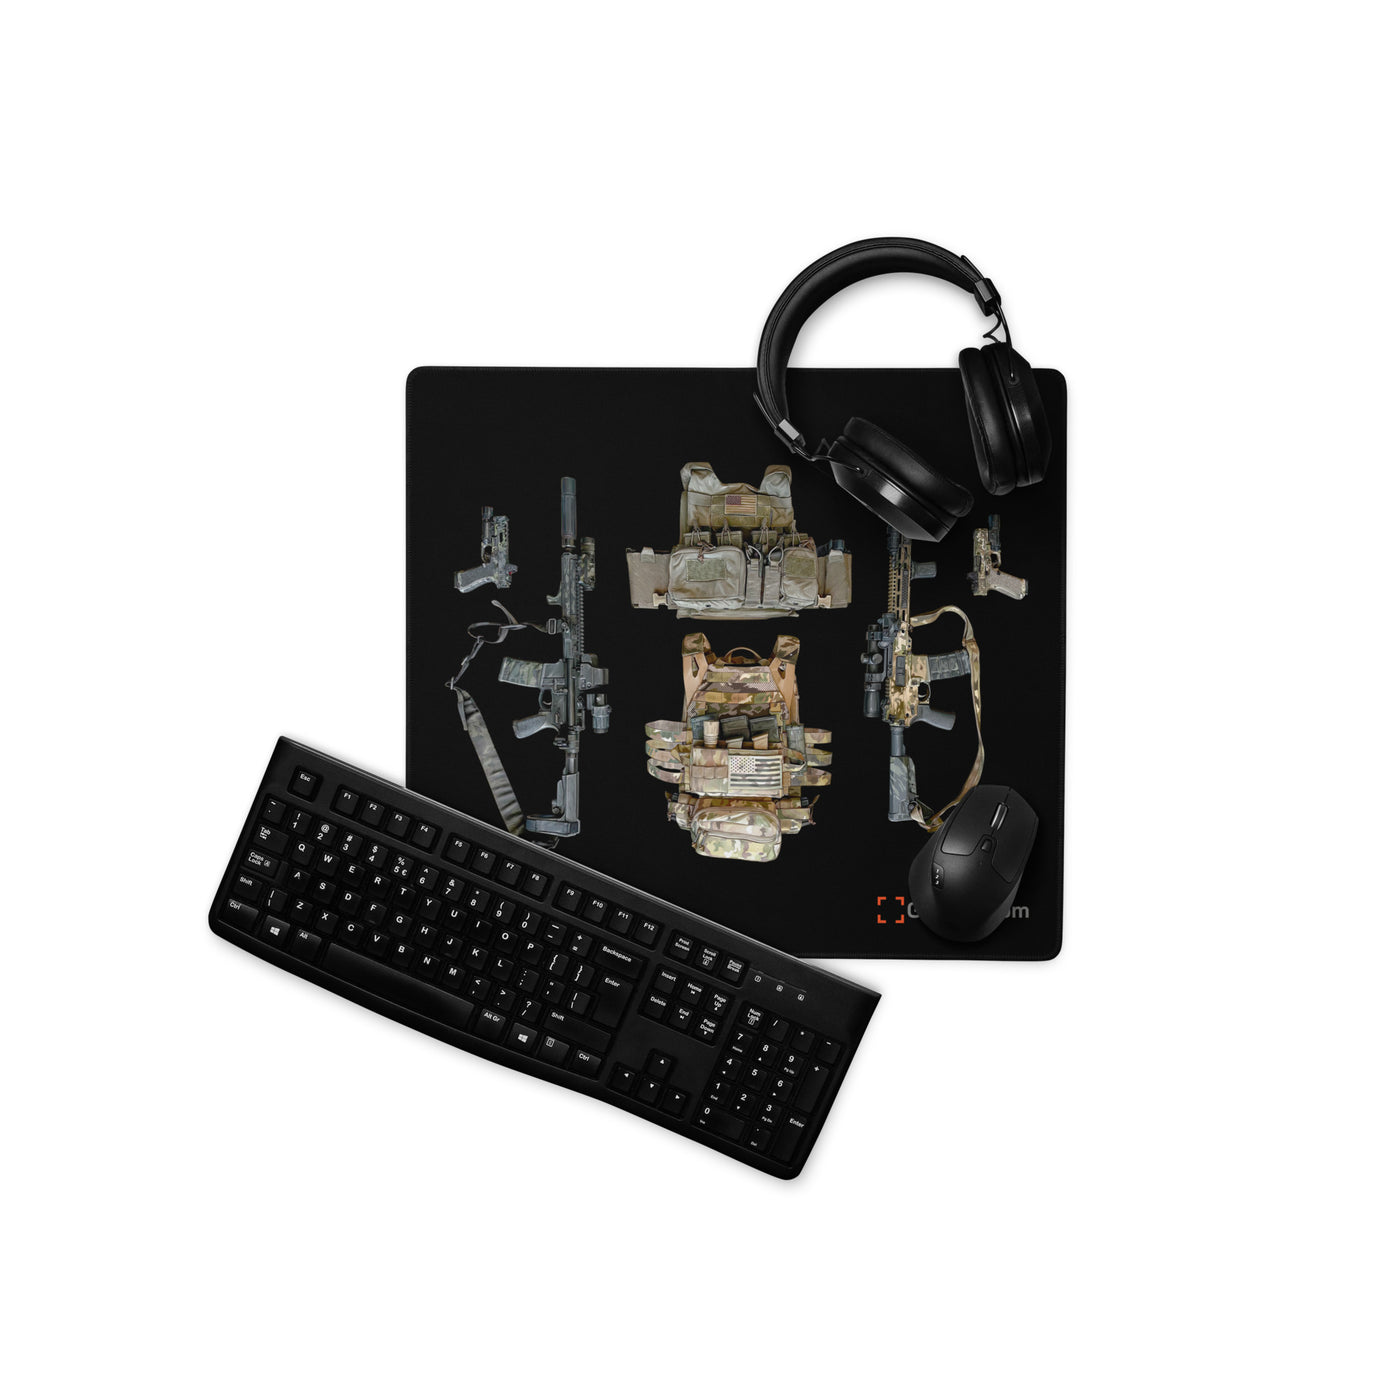 Stay Ready - Tactical Gear - AR15s and Pistols With Plate Carriers Gaming Mouse Pad - Just The Piece - Black Background